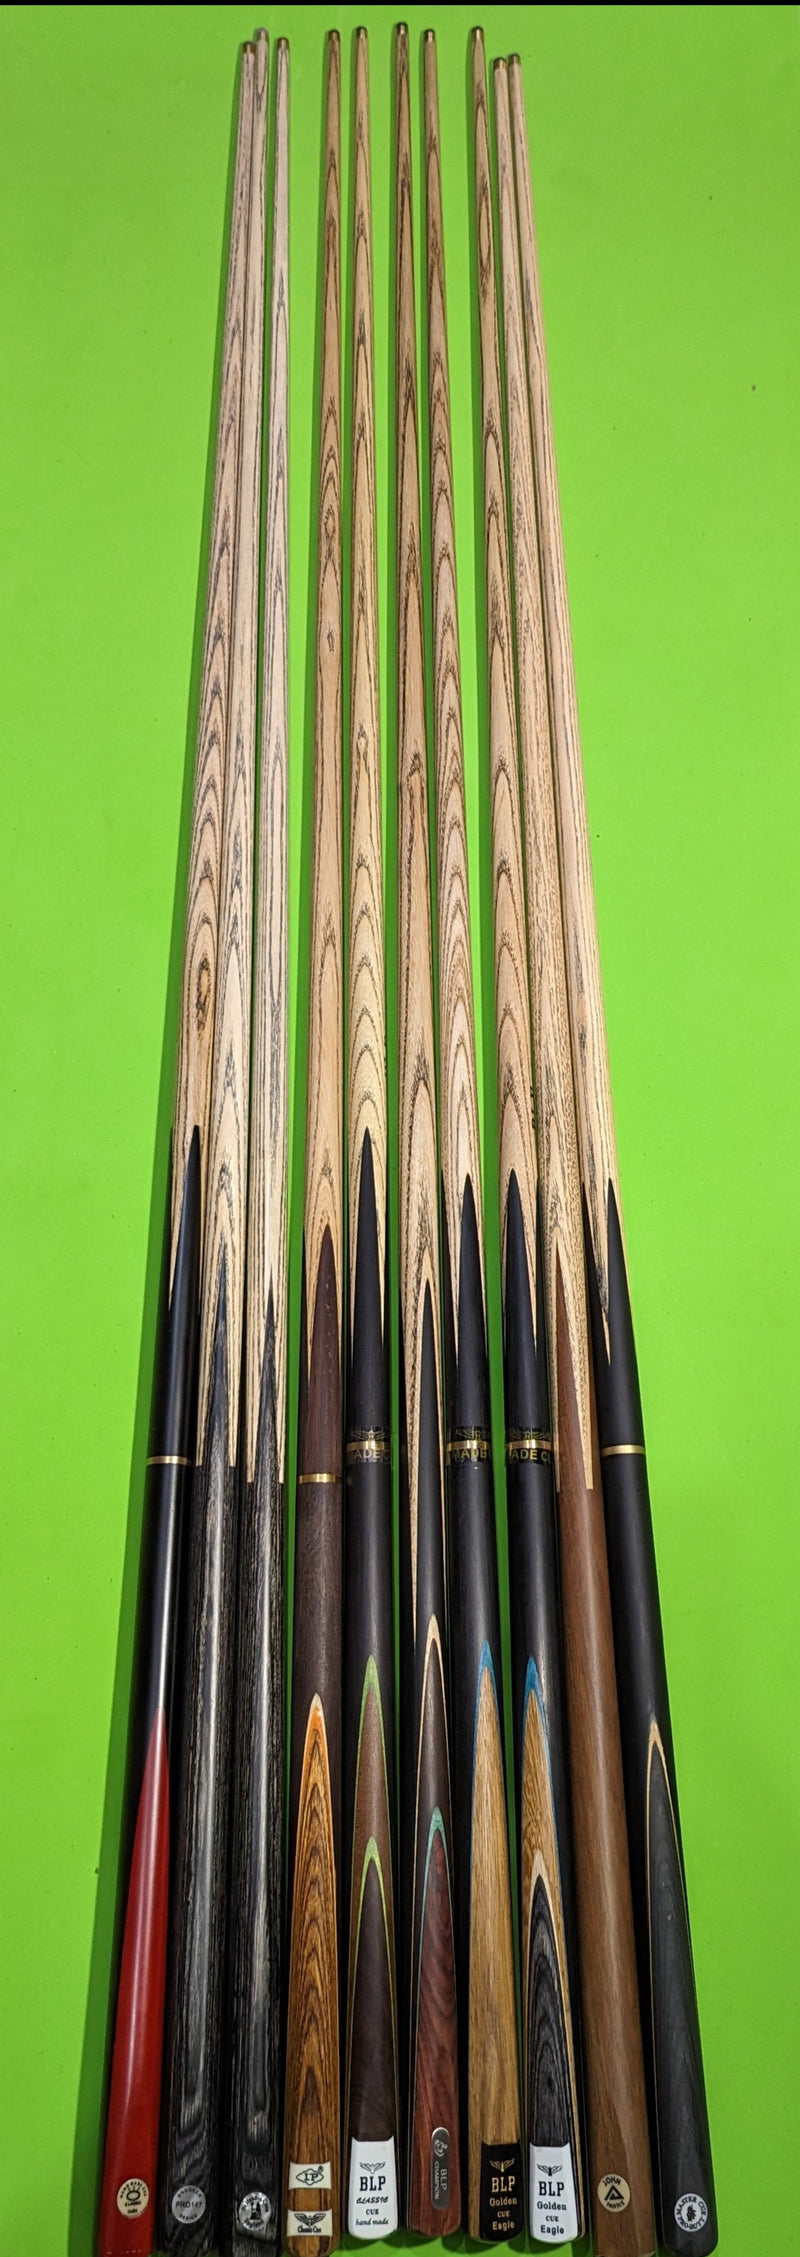 Snooker Cues One Piece and Three piece - Select Your Own (Read Description) Tango Sports